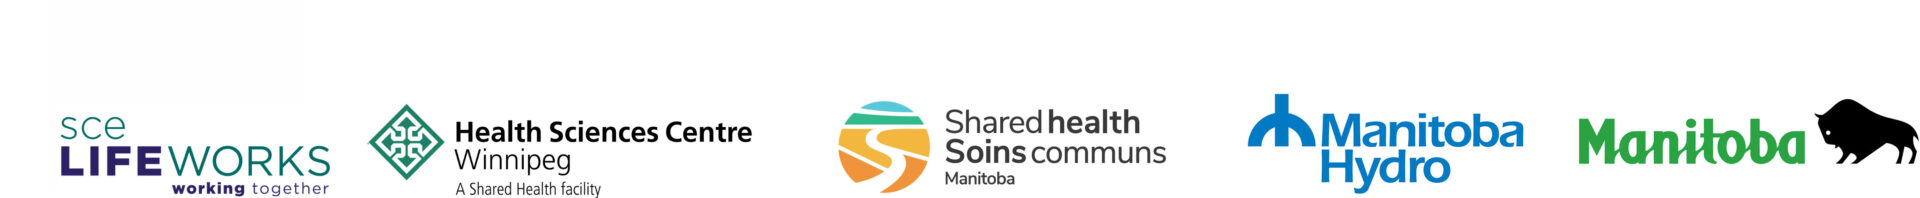 Logos for the following organizations: SCE Lifeworks, Health Sciences Centre, Winnipeg Regional Health Authority, Manitoba Hydro, and the Government of Manitoba.